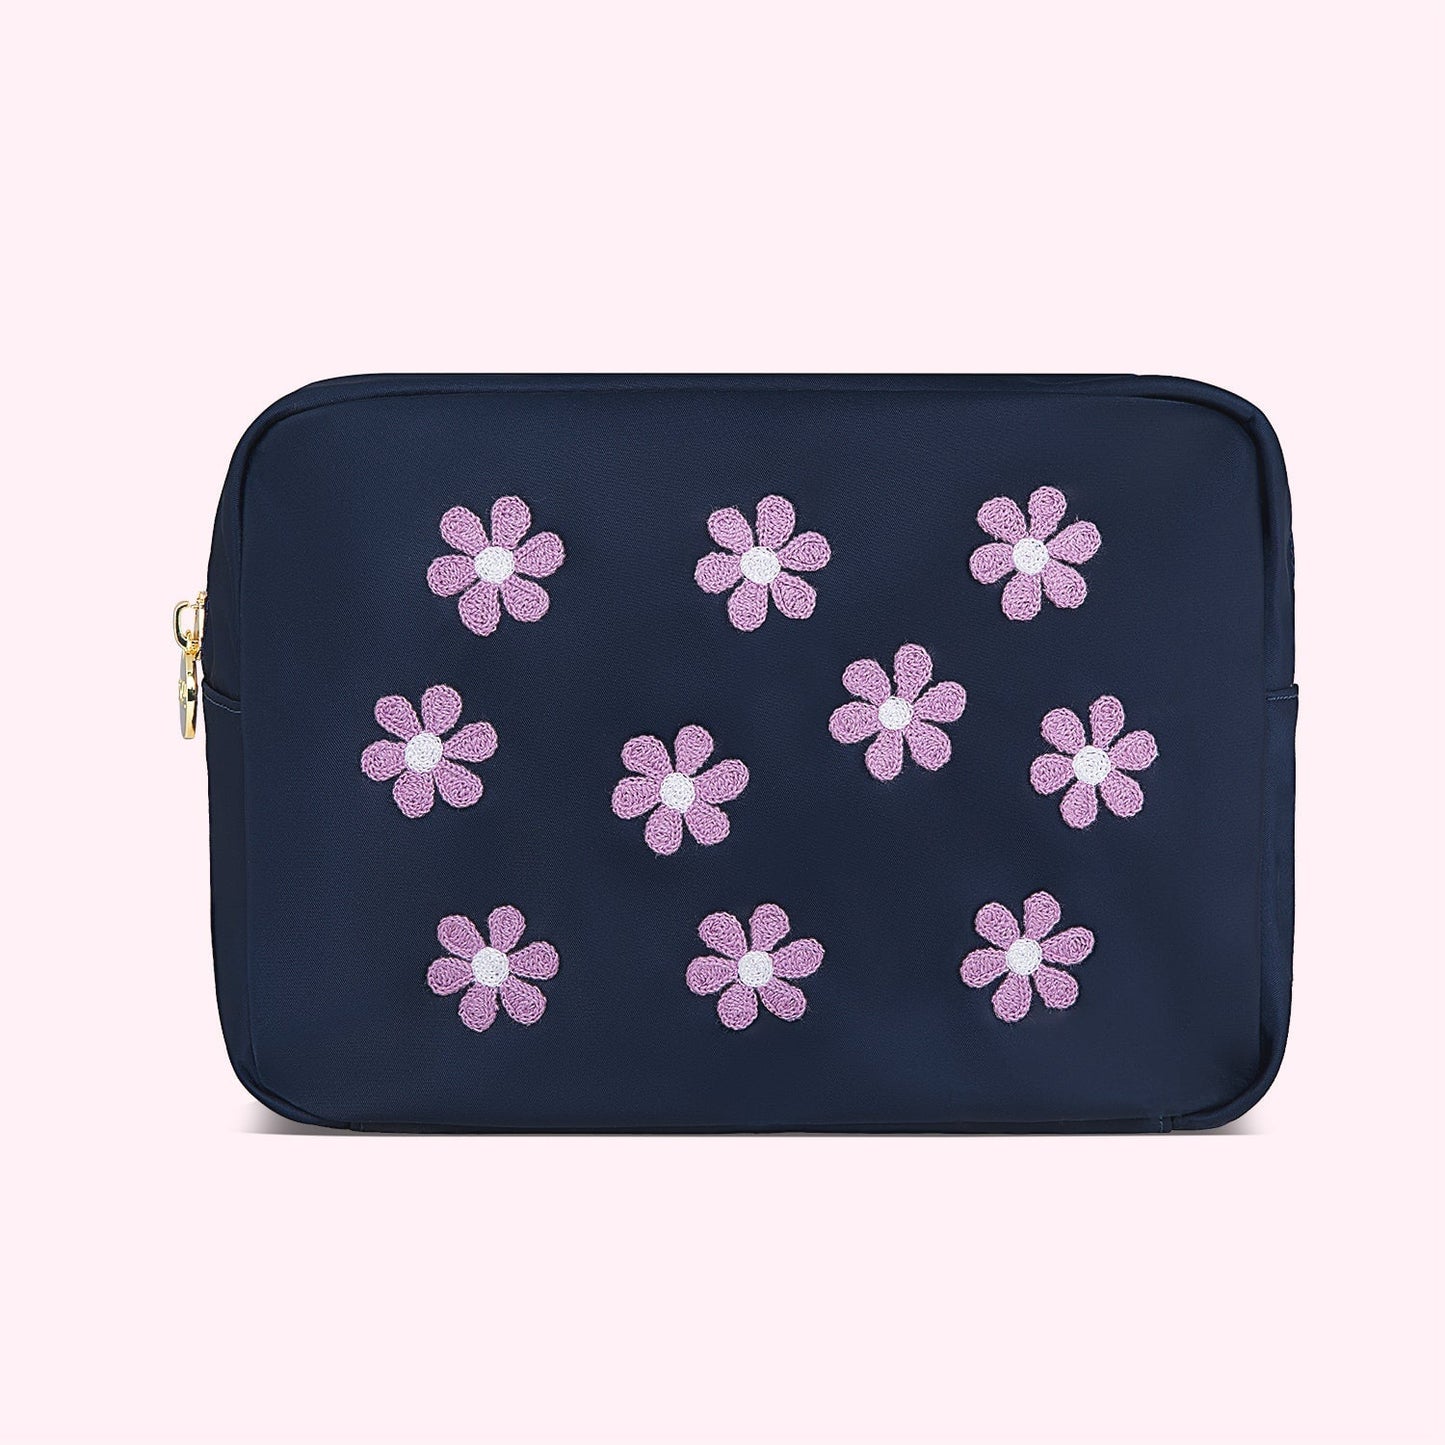 Hand Embroidered Daisies Large Pouch